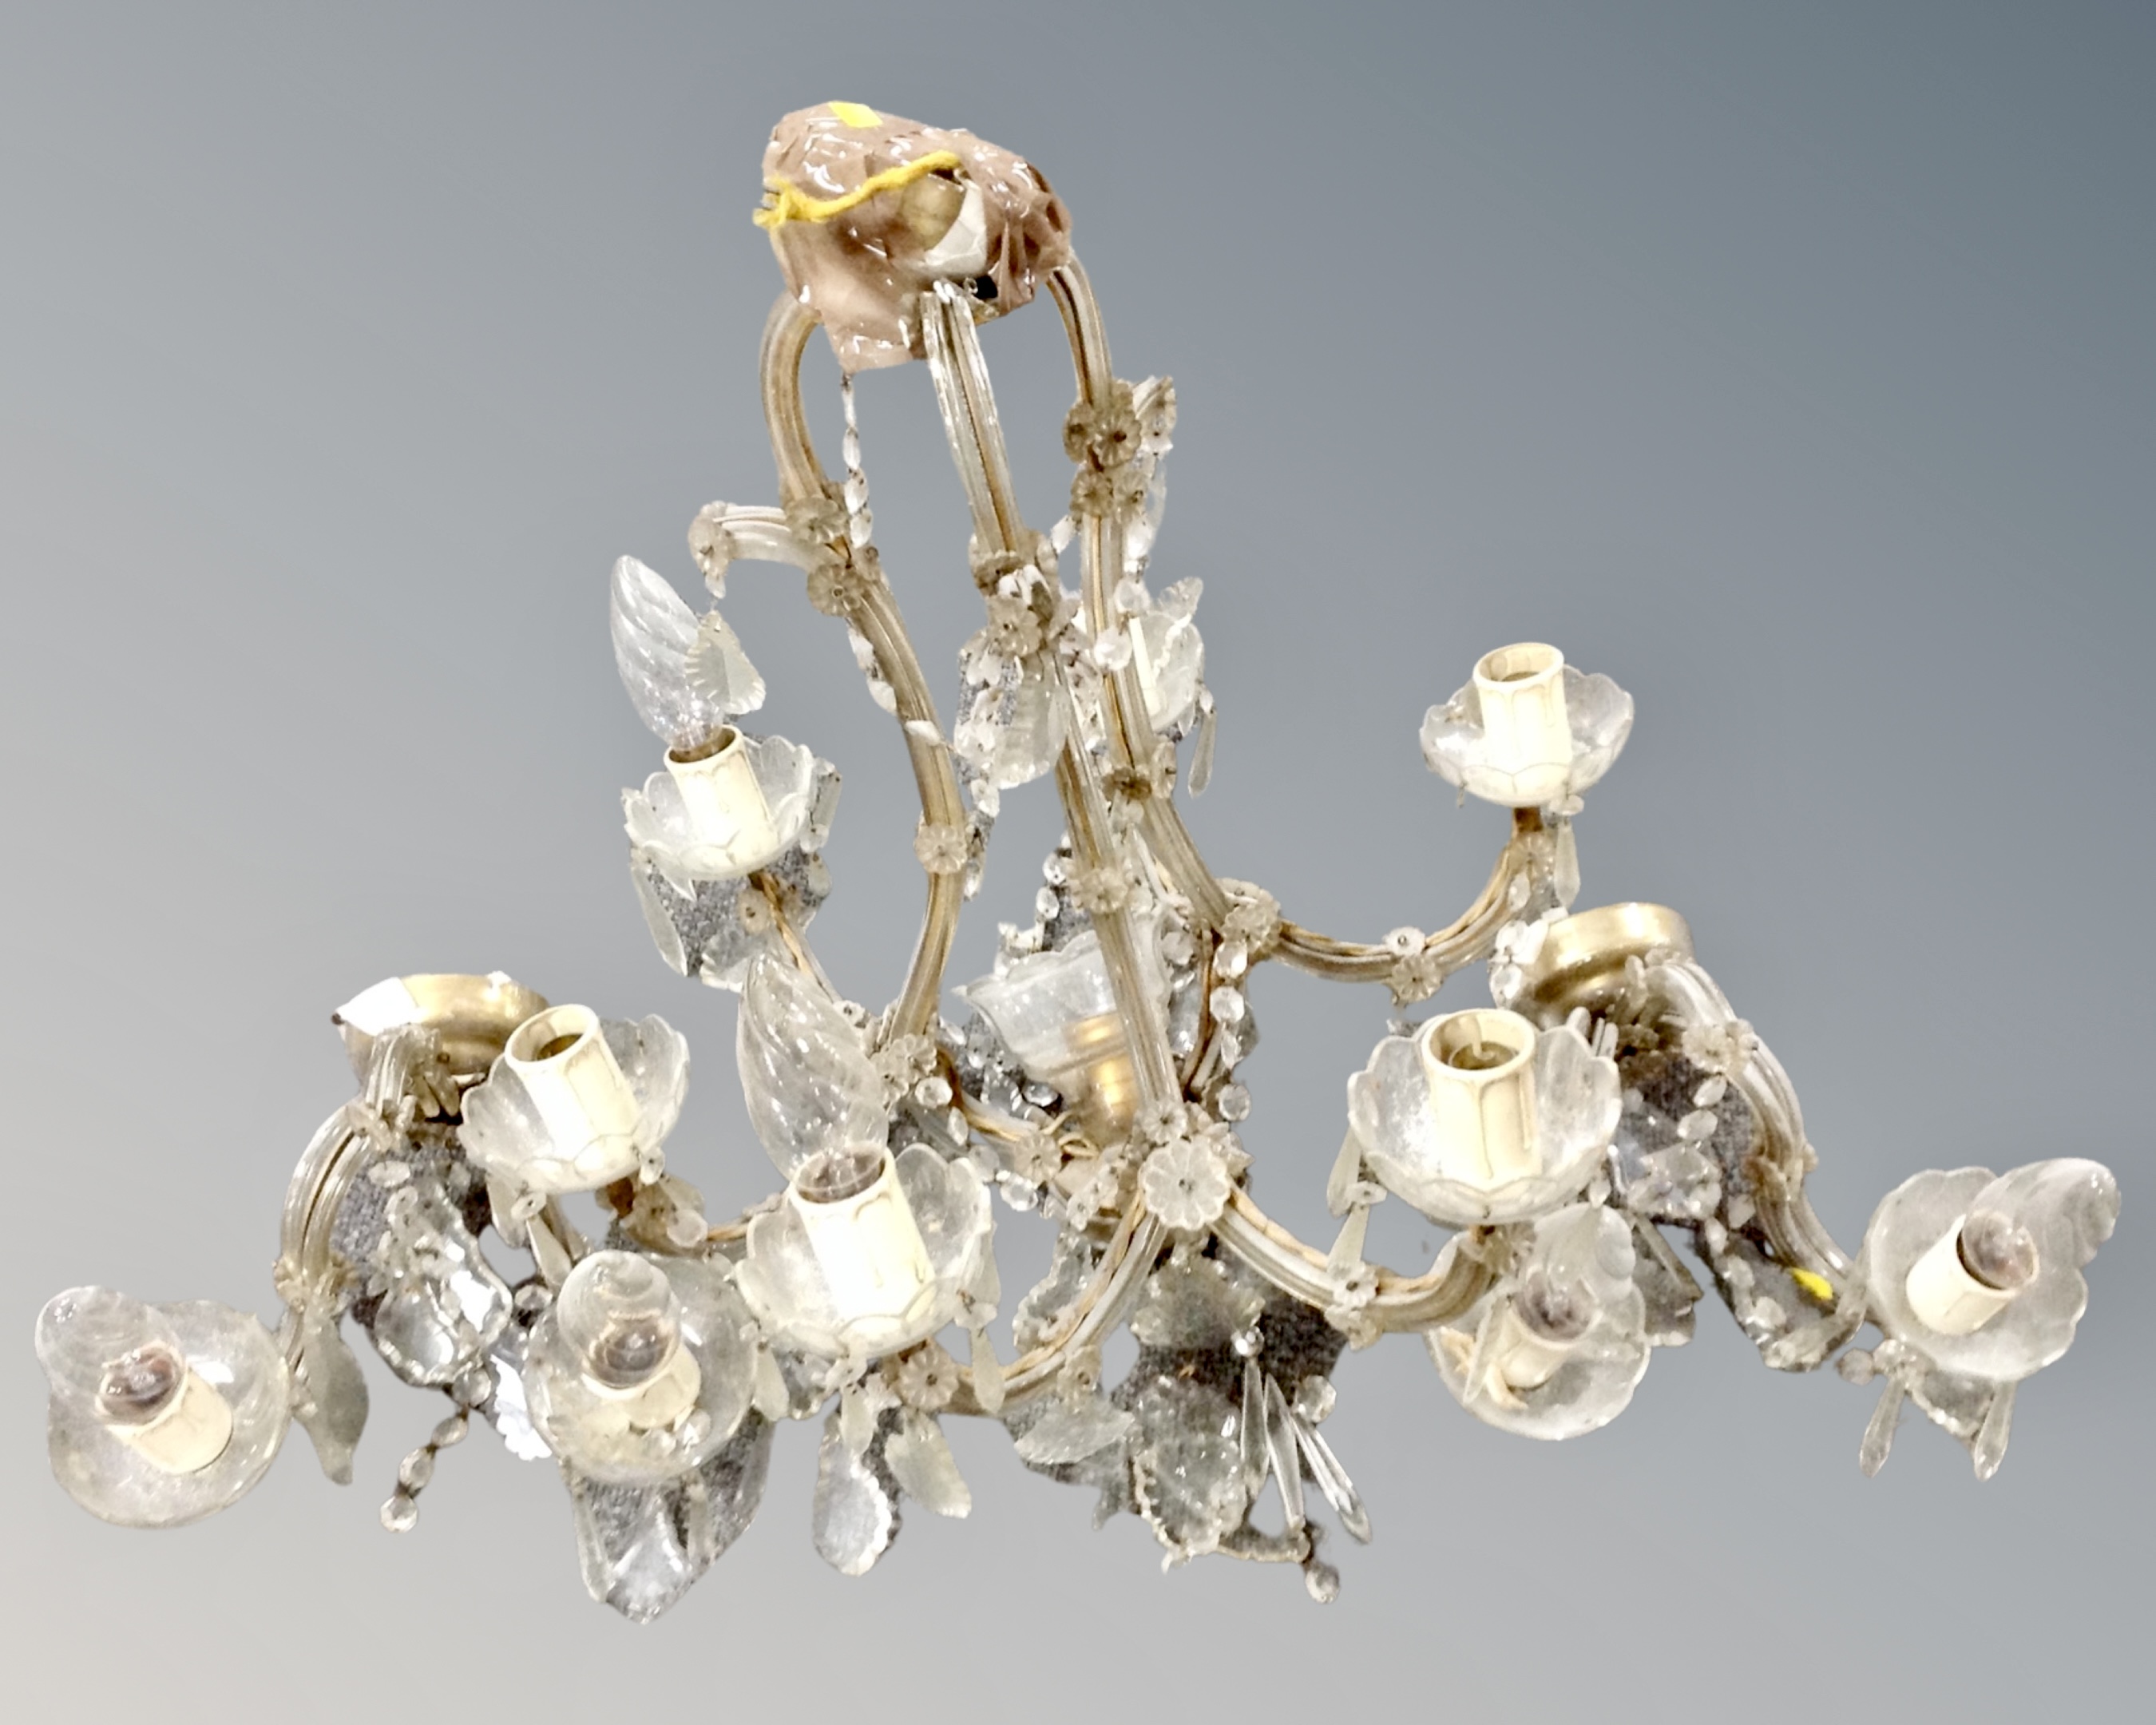 A vintage glass six-way light fitting with drops together with matching wall lights